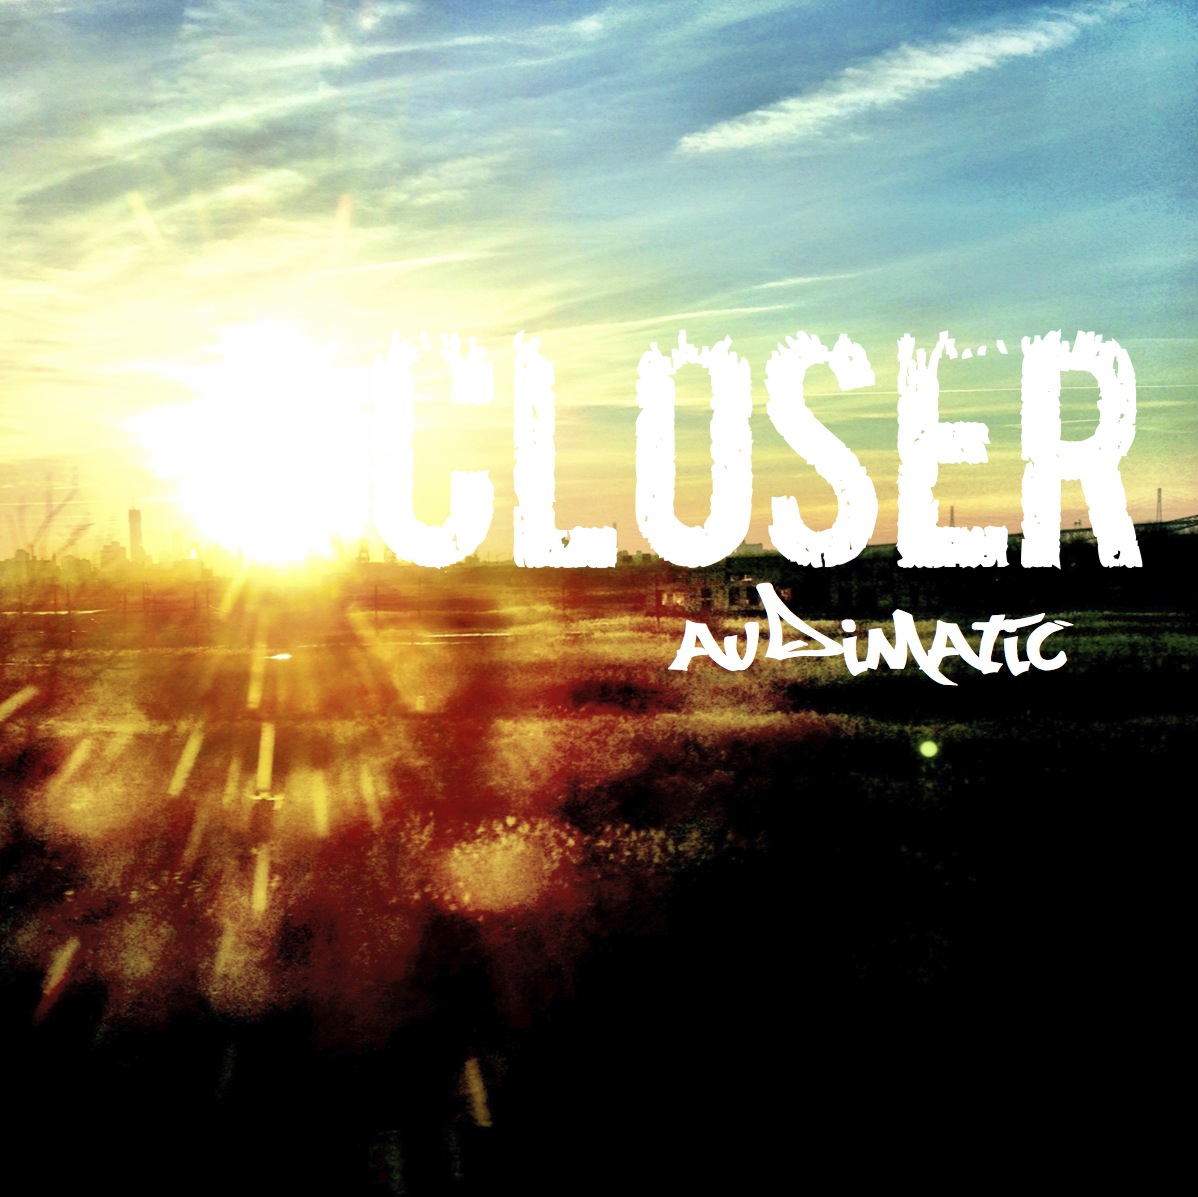 Audimatic (Audible Doctor & maticulous) “Closer” [DOPE!]